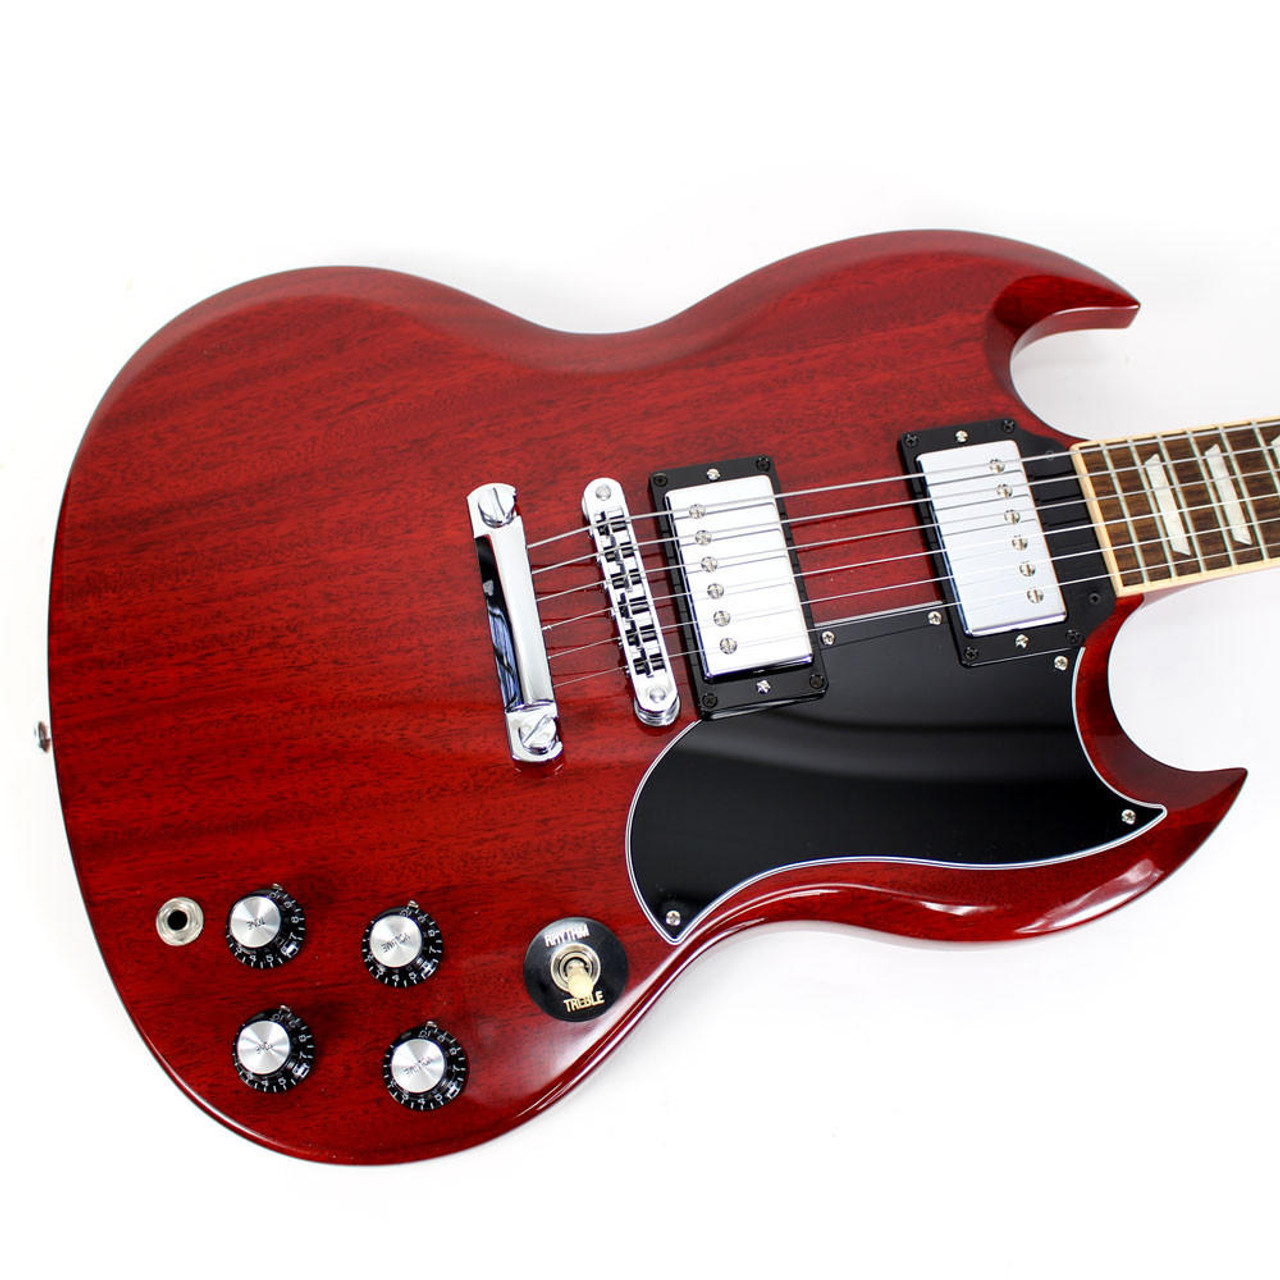 2013 Gibson SG Standard Electric Guitar in Heritage Cherry Finish